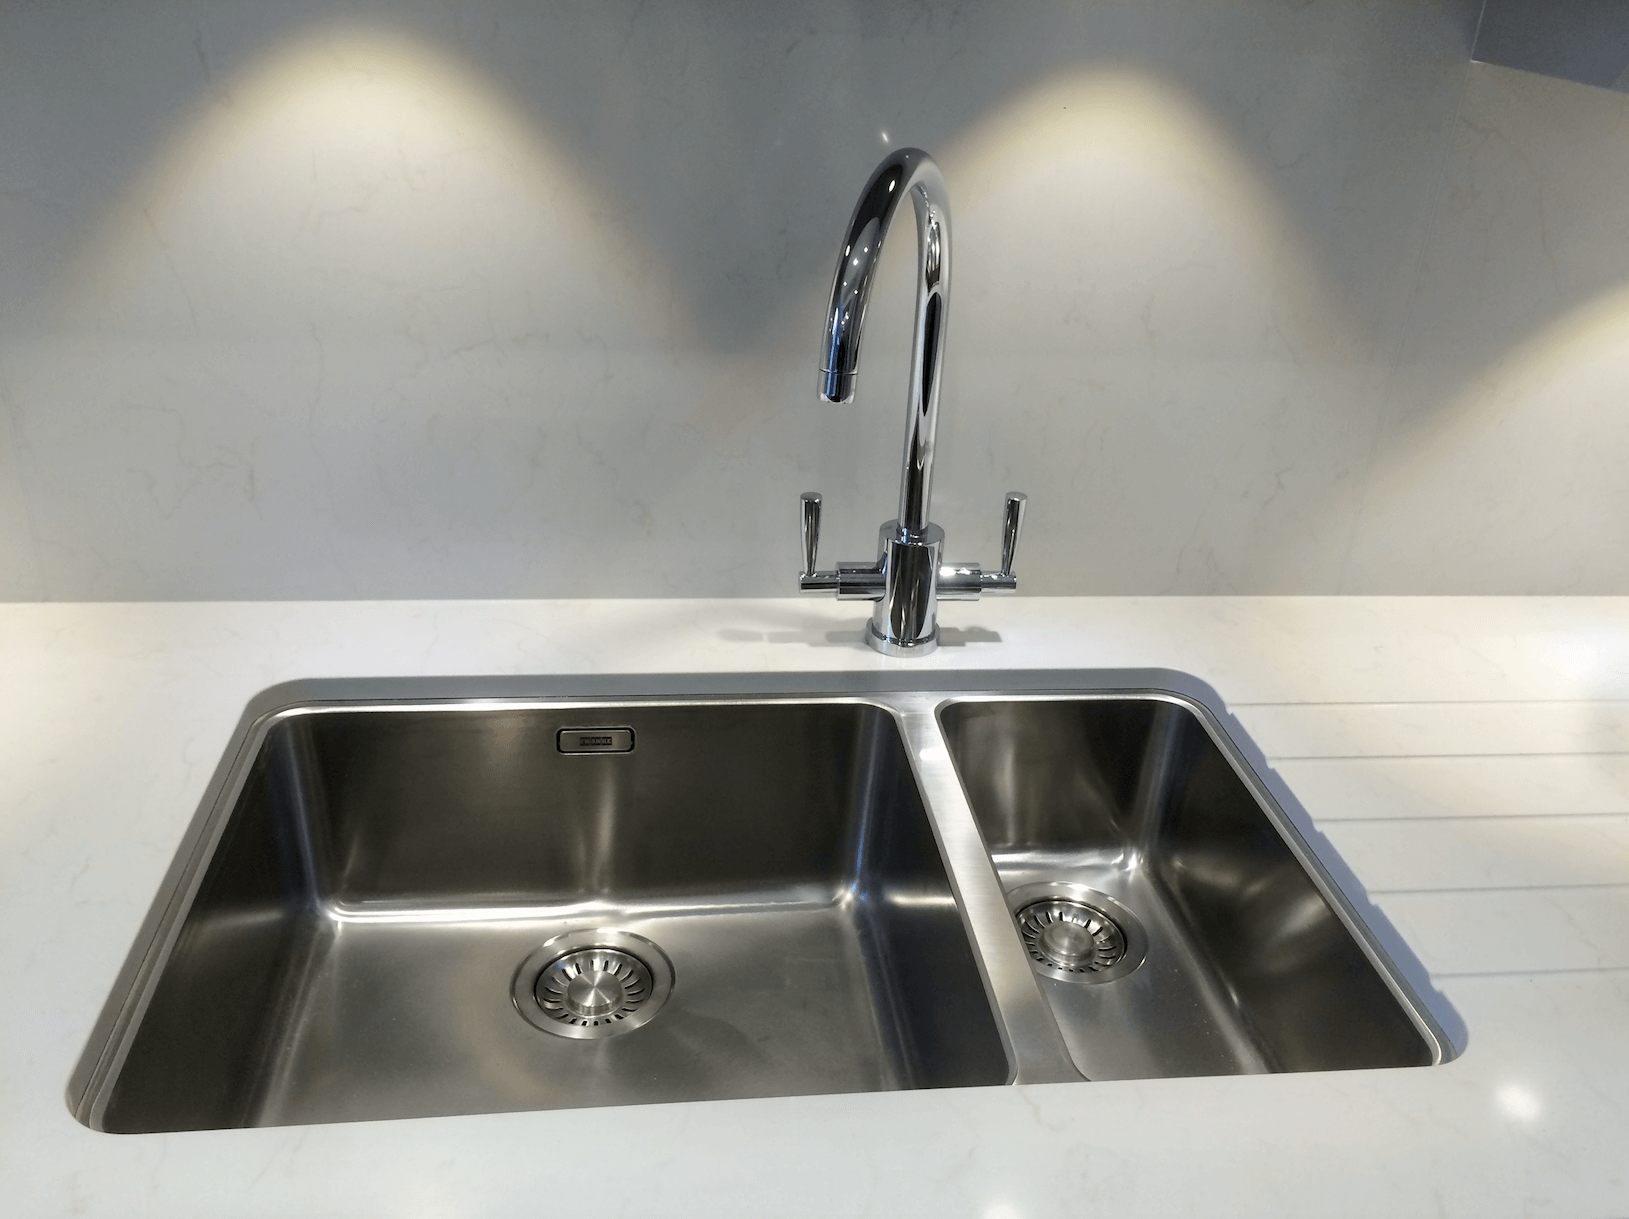 Fresh new chrome taps and sink.